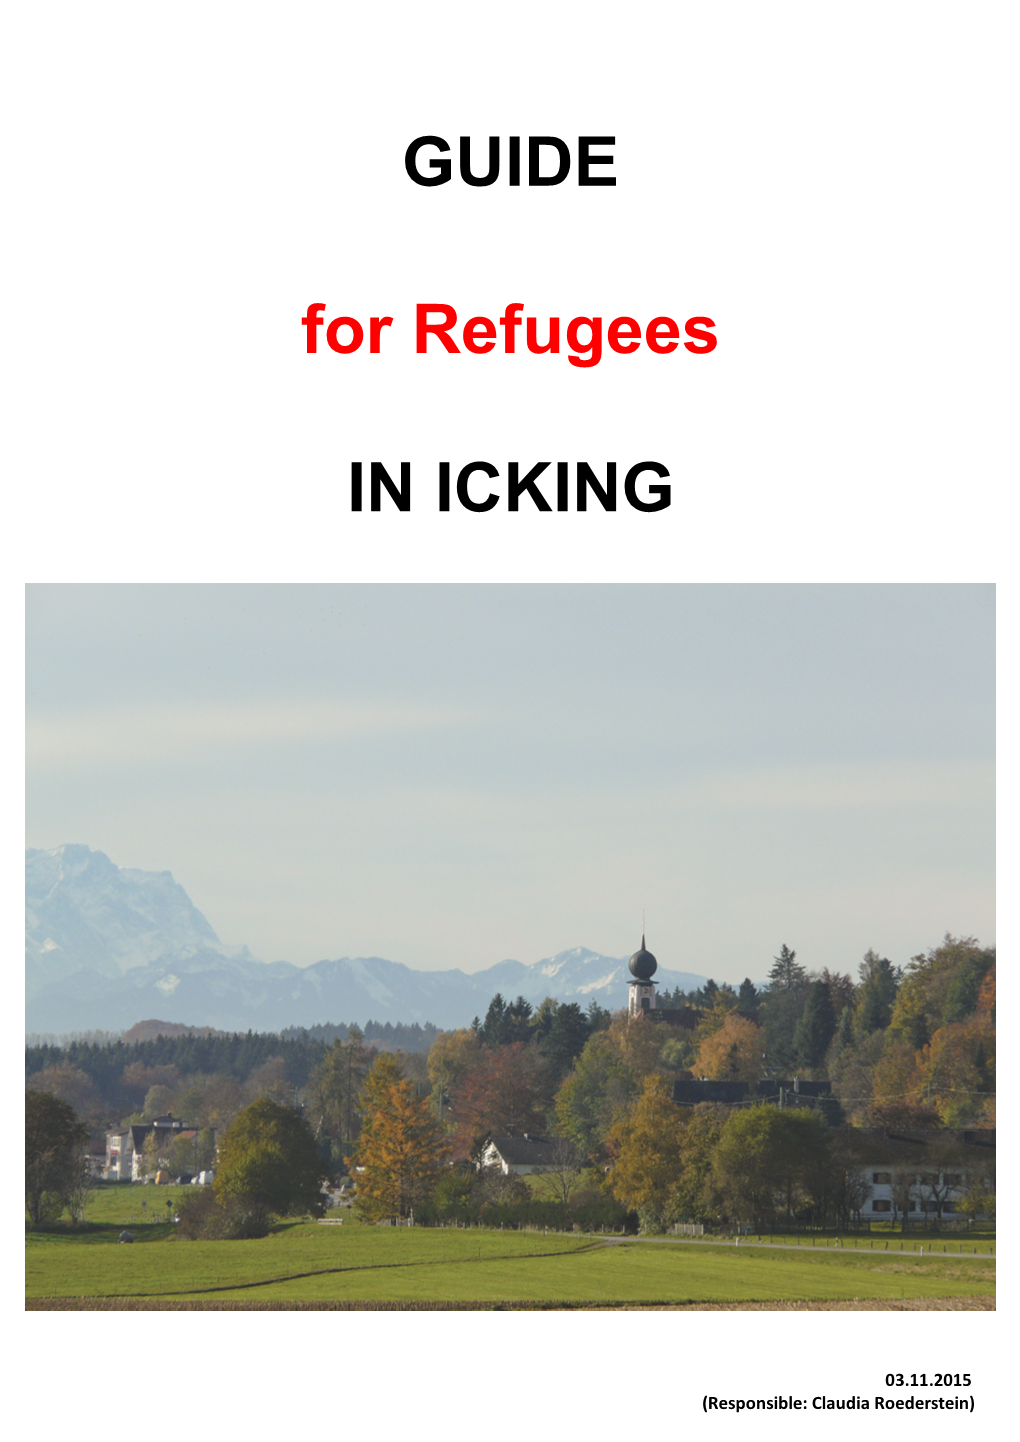 Guide for Refugees in Icking (03.11.15) Page 0 03.11.2015 (Responsible: Claudia Roederstein)